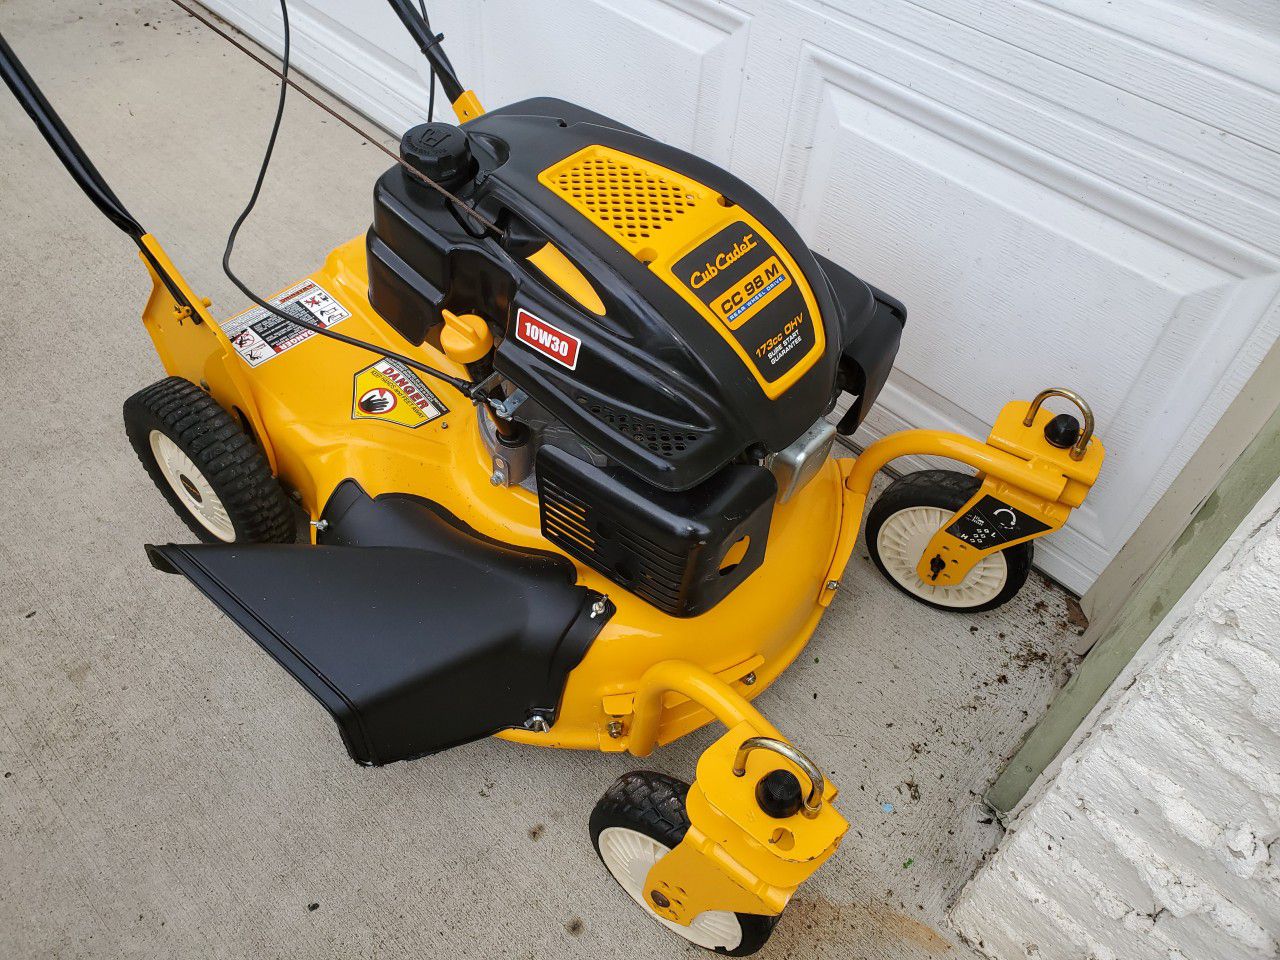 Cub cadet self proppeled lawnmower in xlnt cond